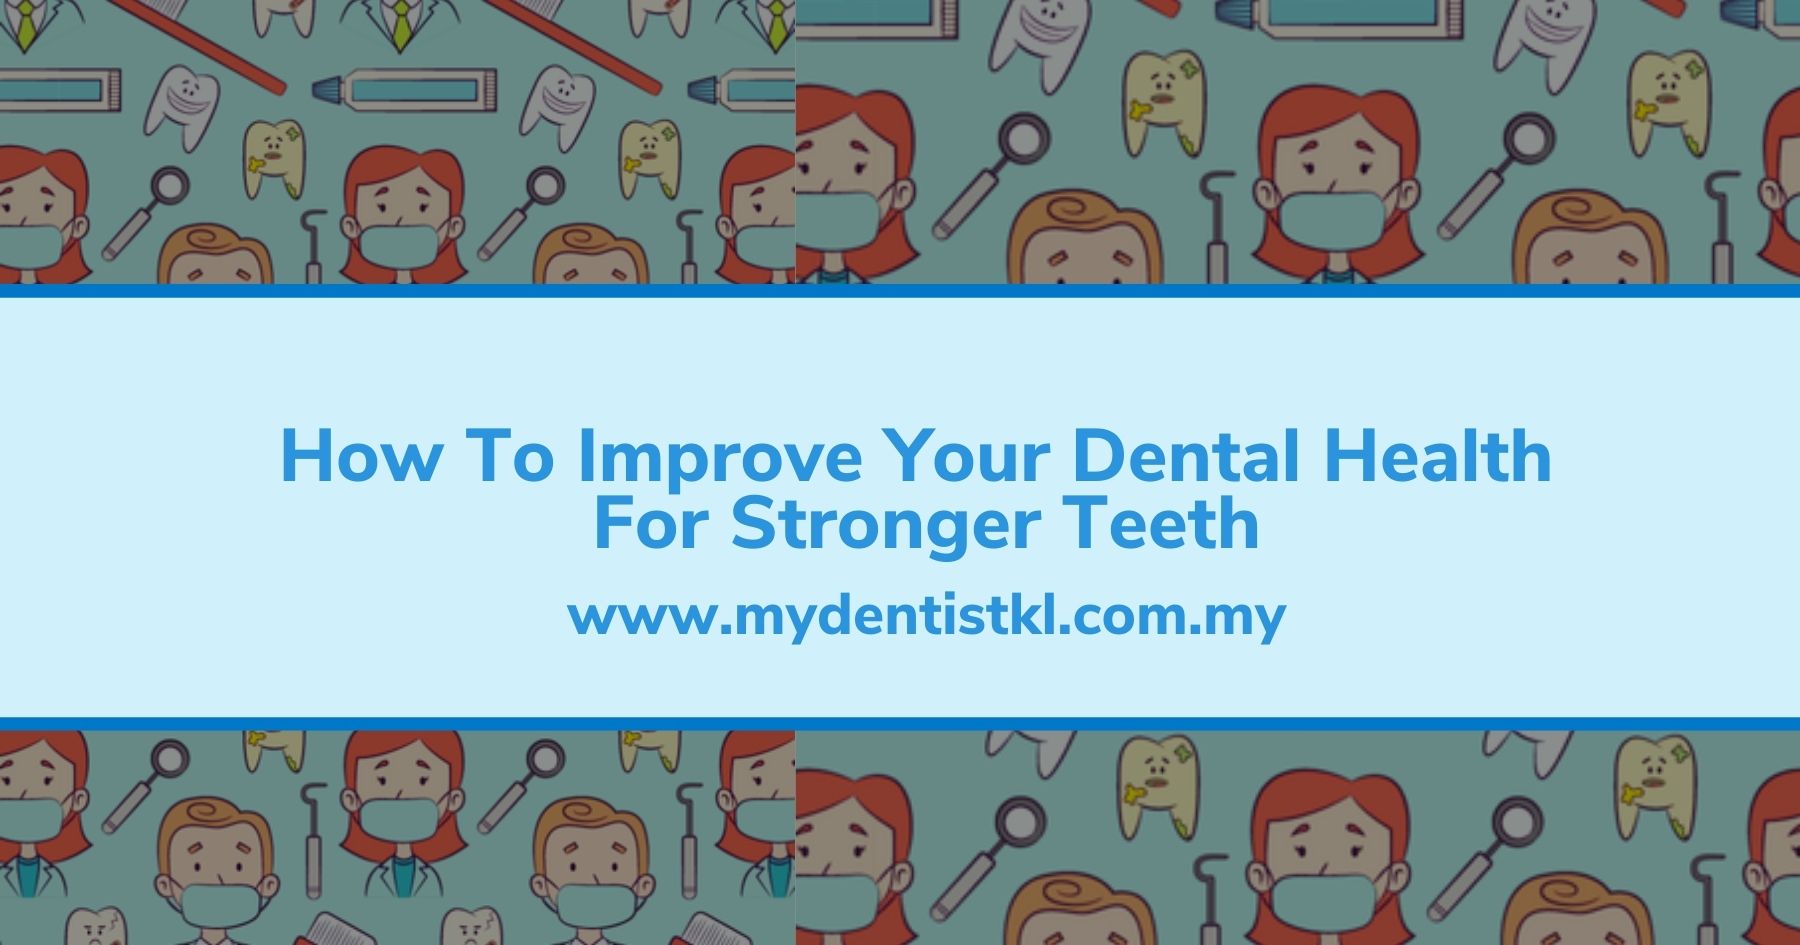 How To Improve Your Dental Health For Stronger Teeth